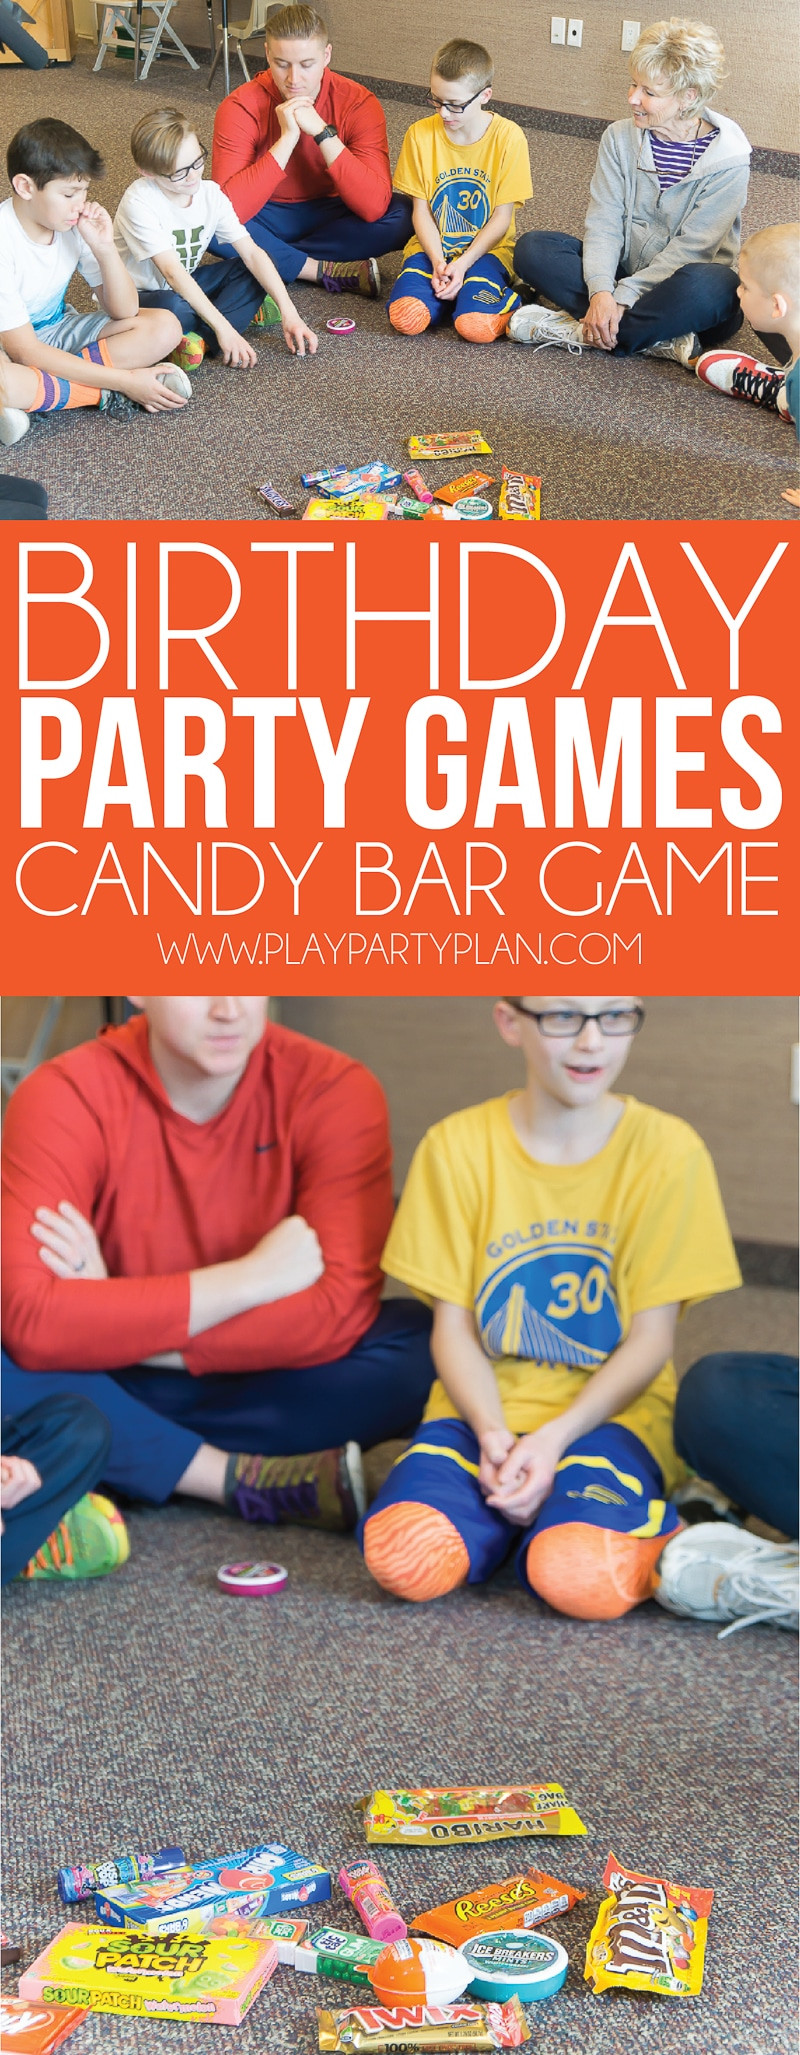 Child Games For Birthday Party
 Hilarious Birthday Party Games for Kids & Adults Play